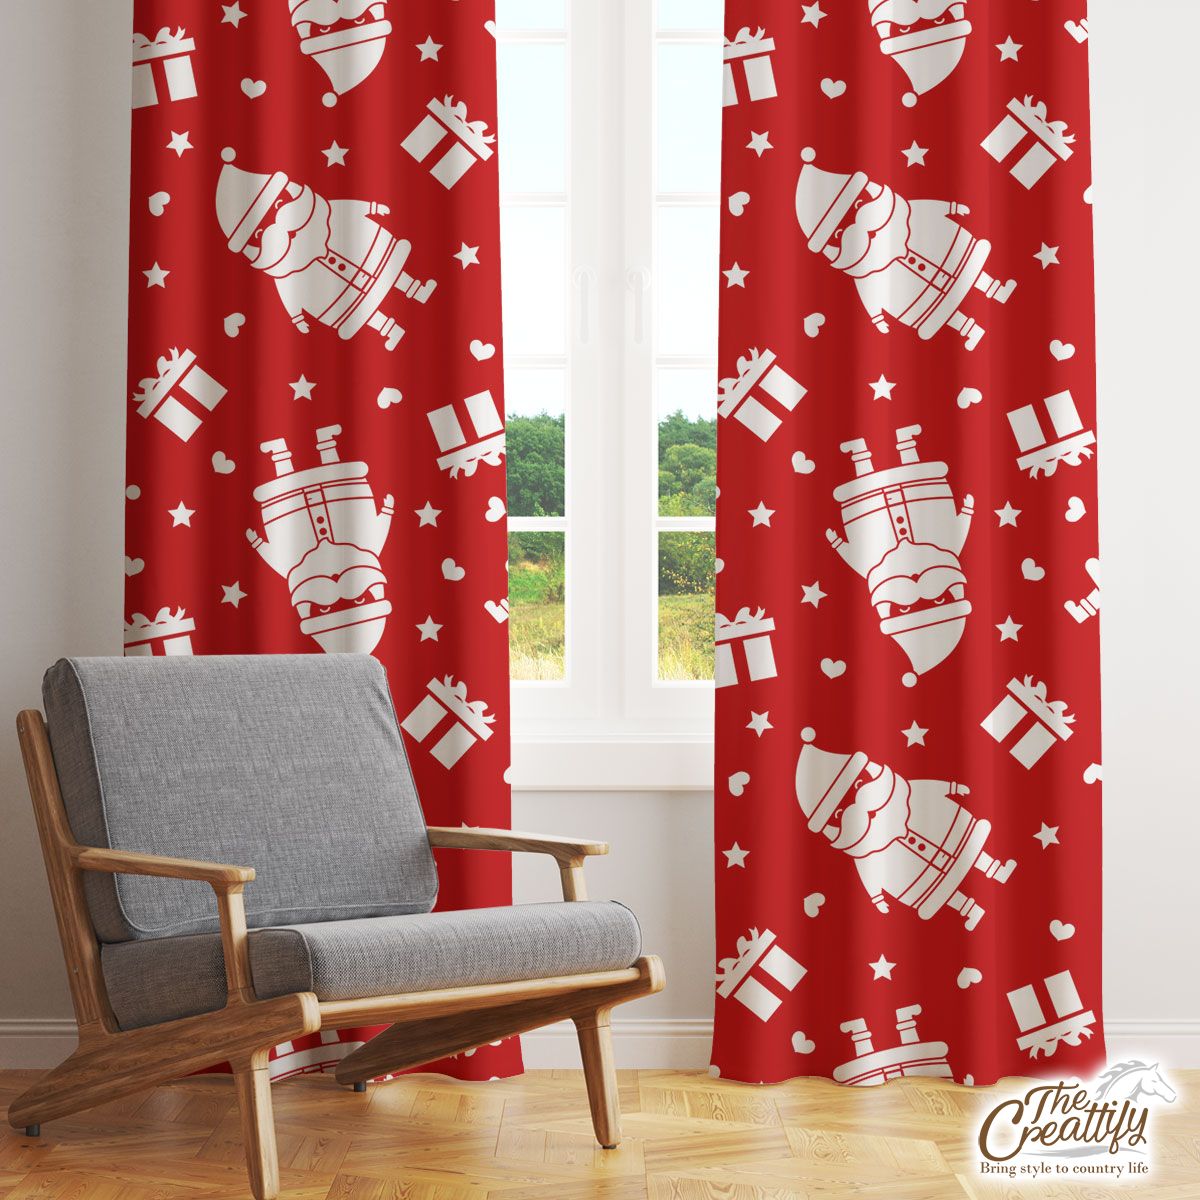 Cute Santa Claus With Christmas Gifts On The Red Background Window Curtain